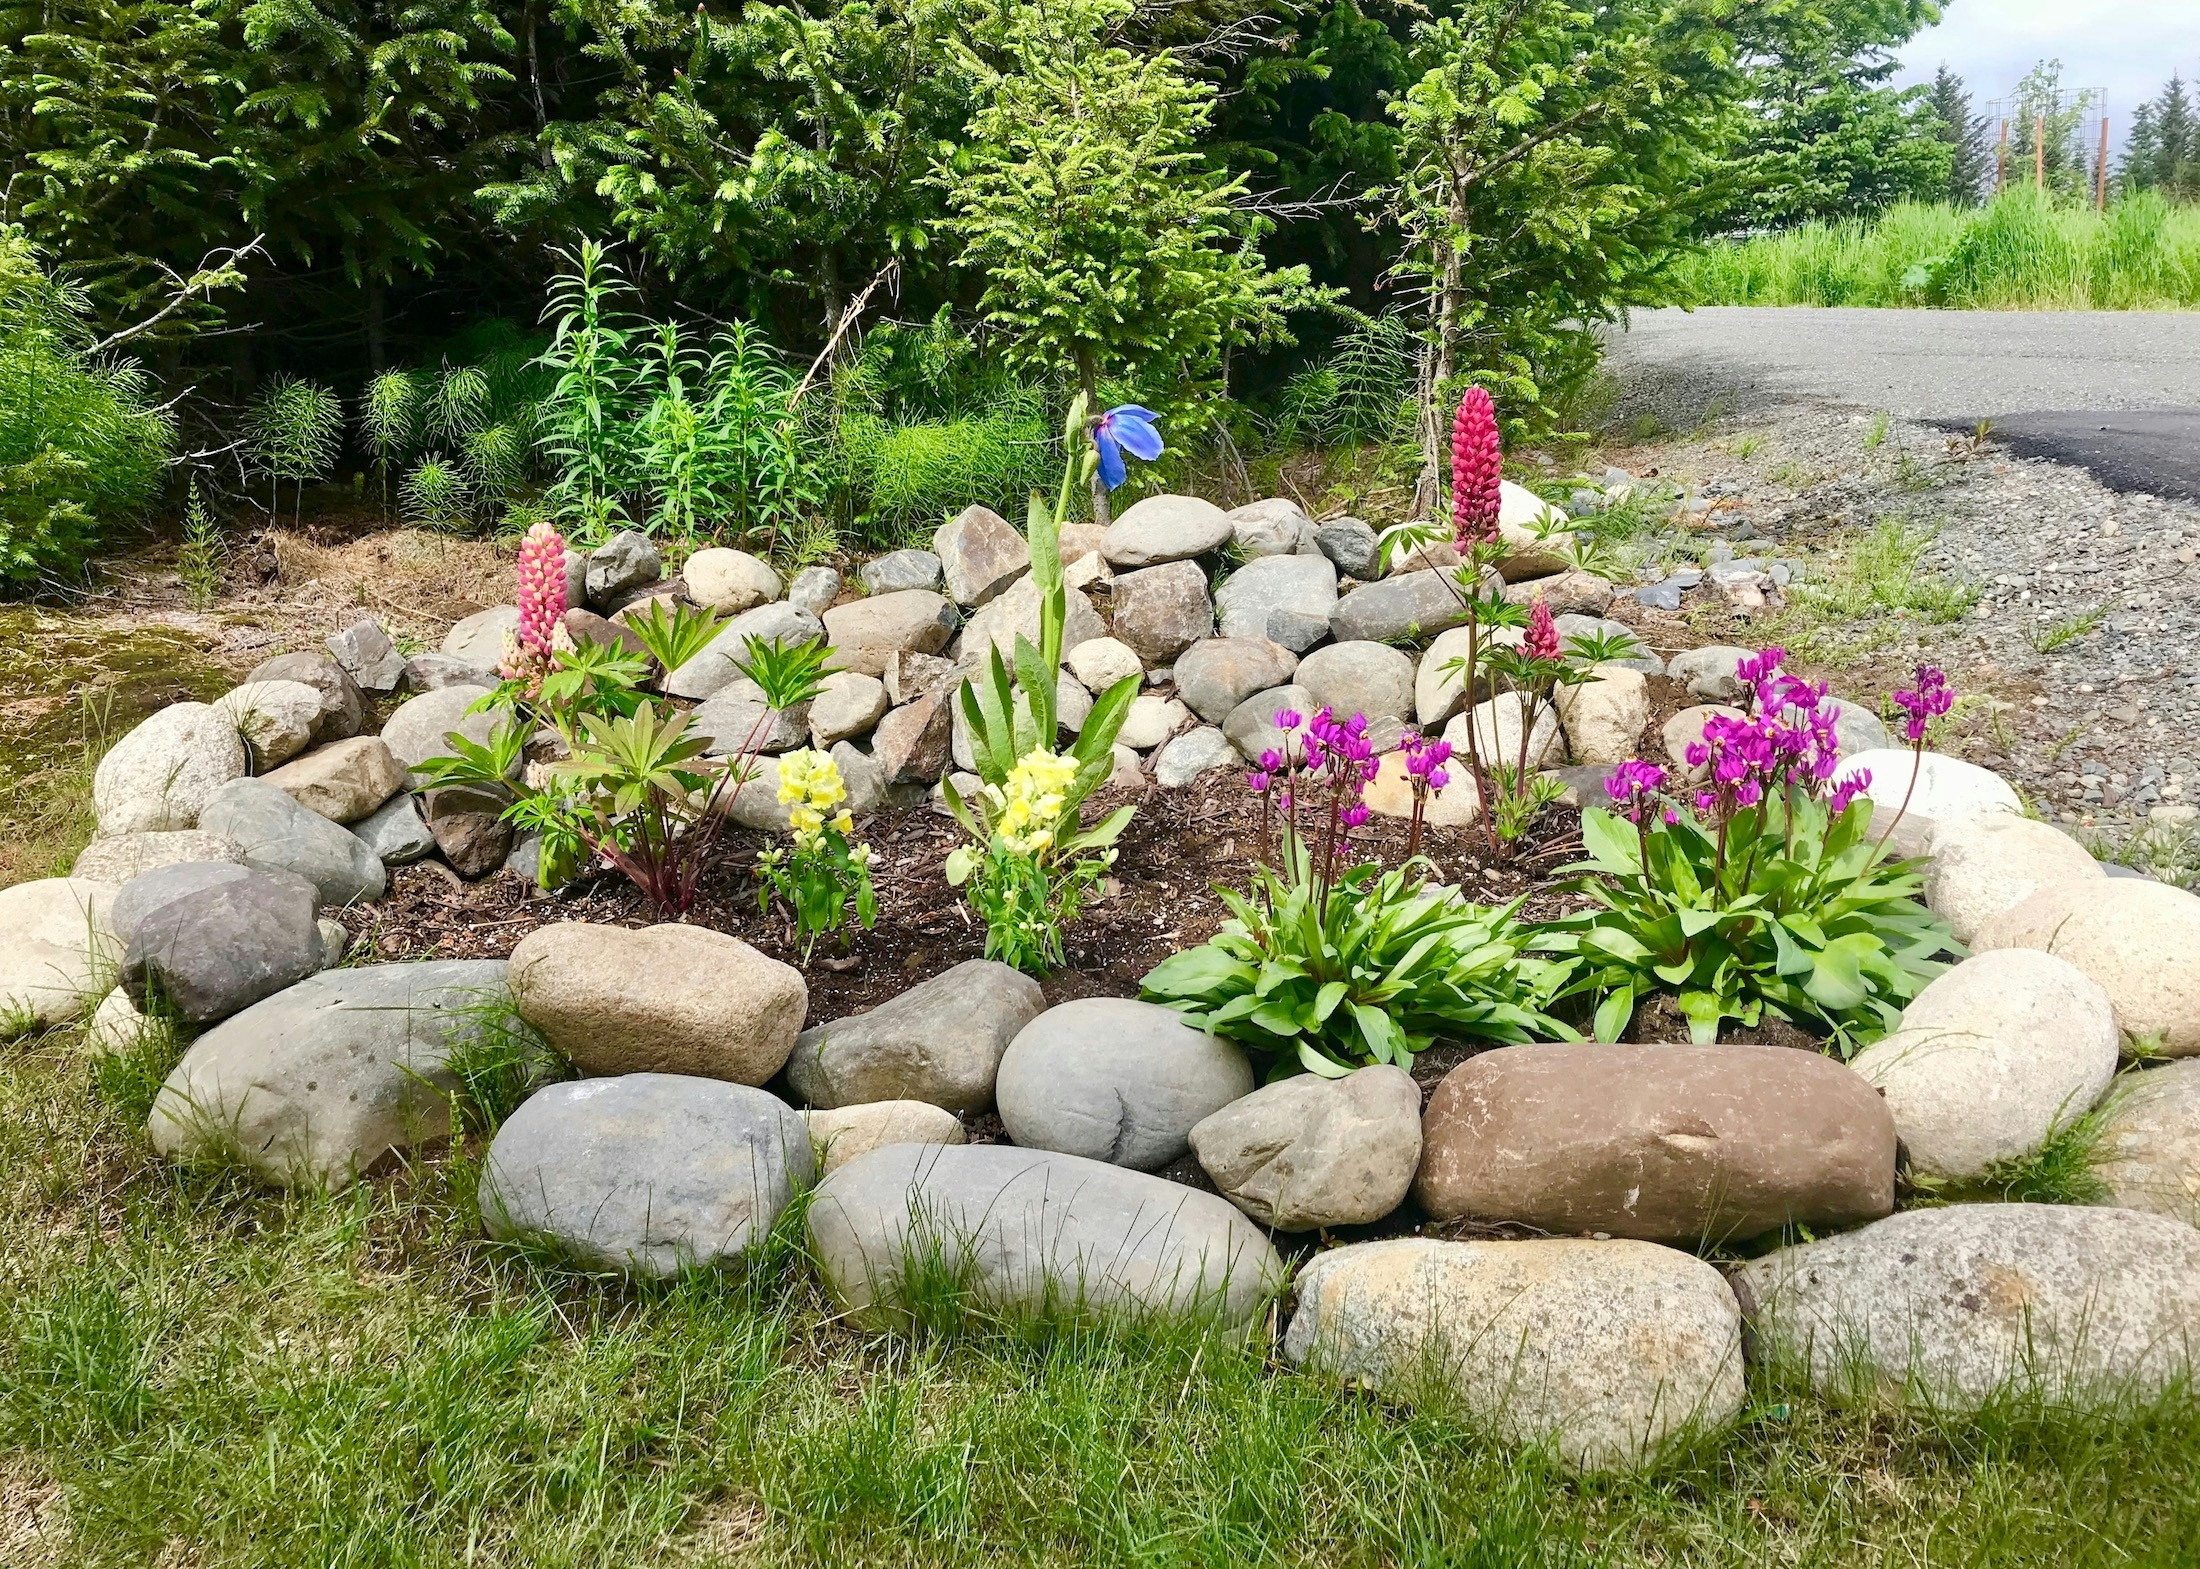 Small garden with colorful flowers with a perimeter of rocks